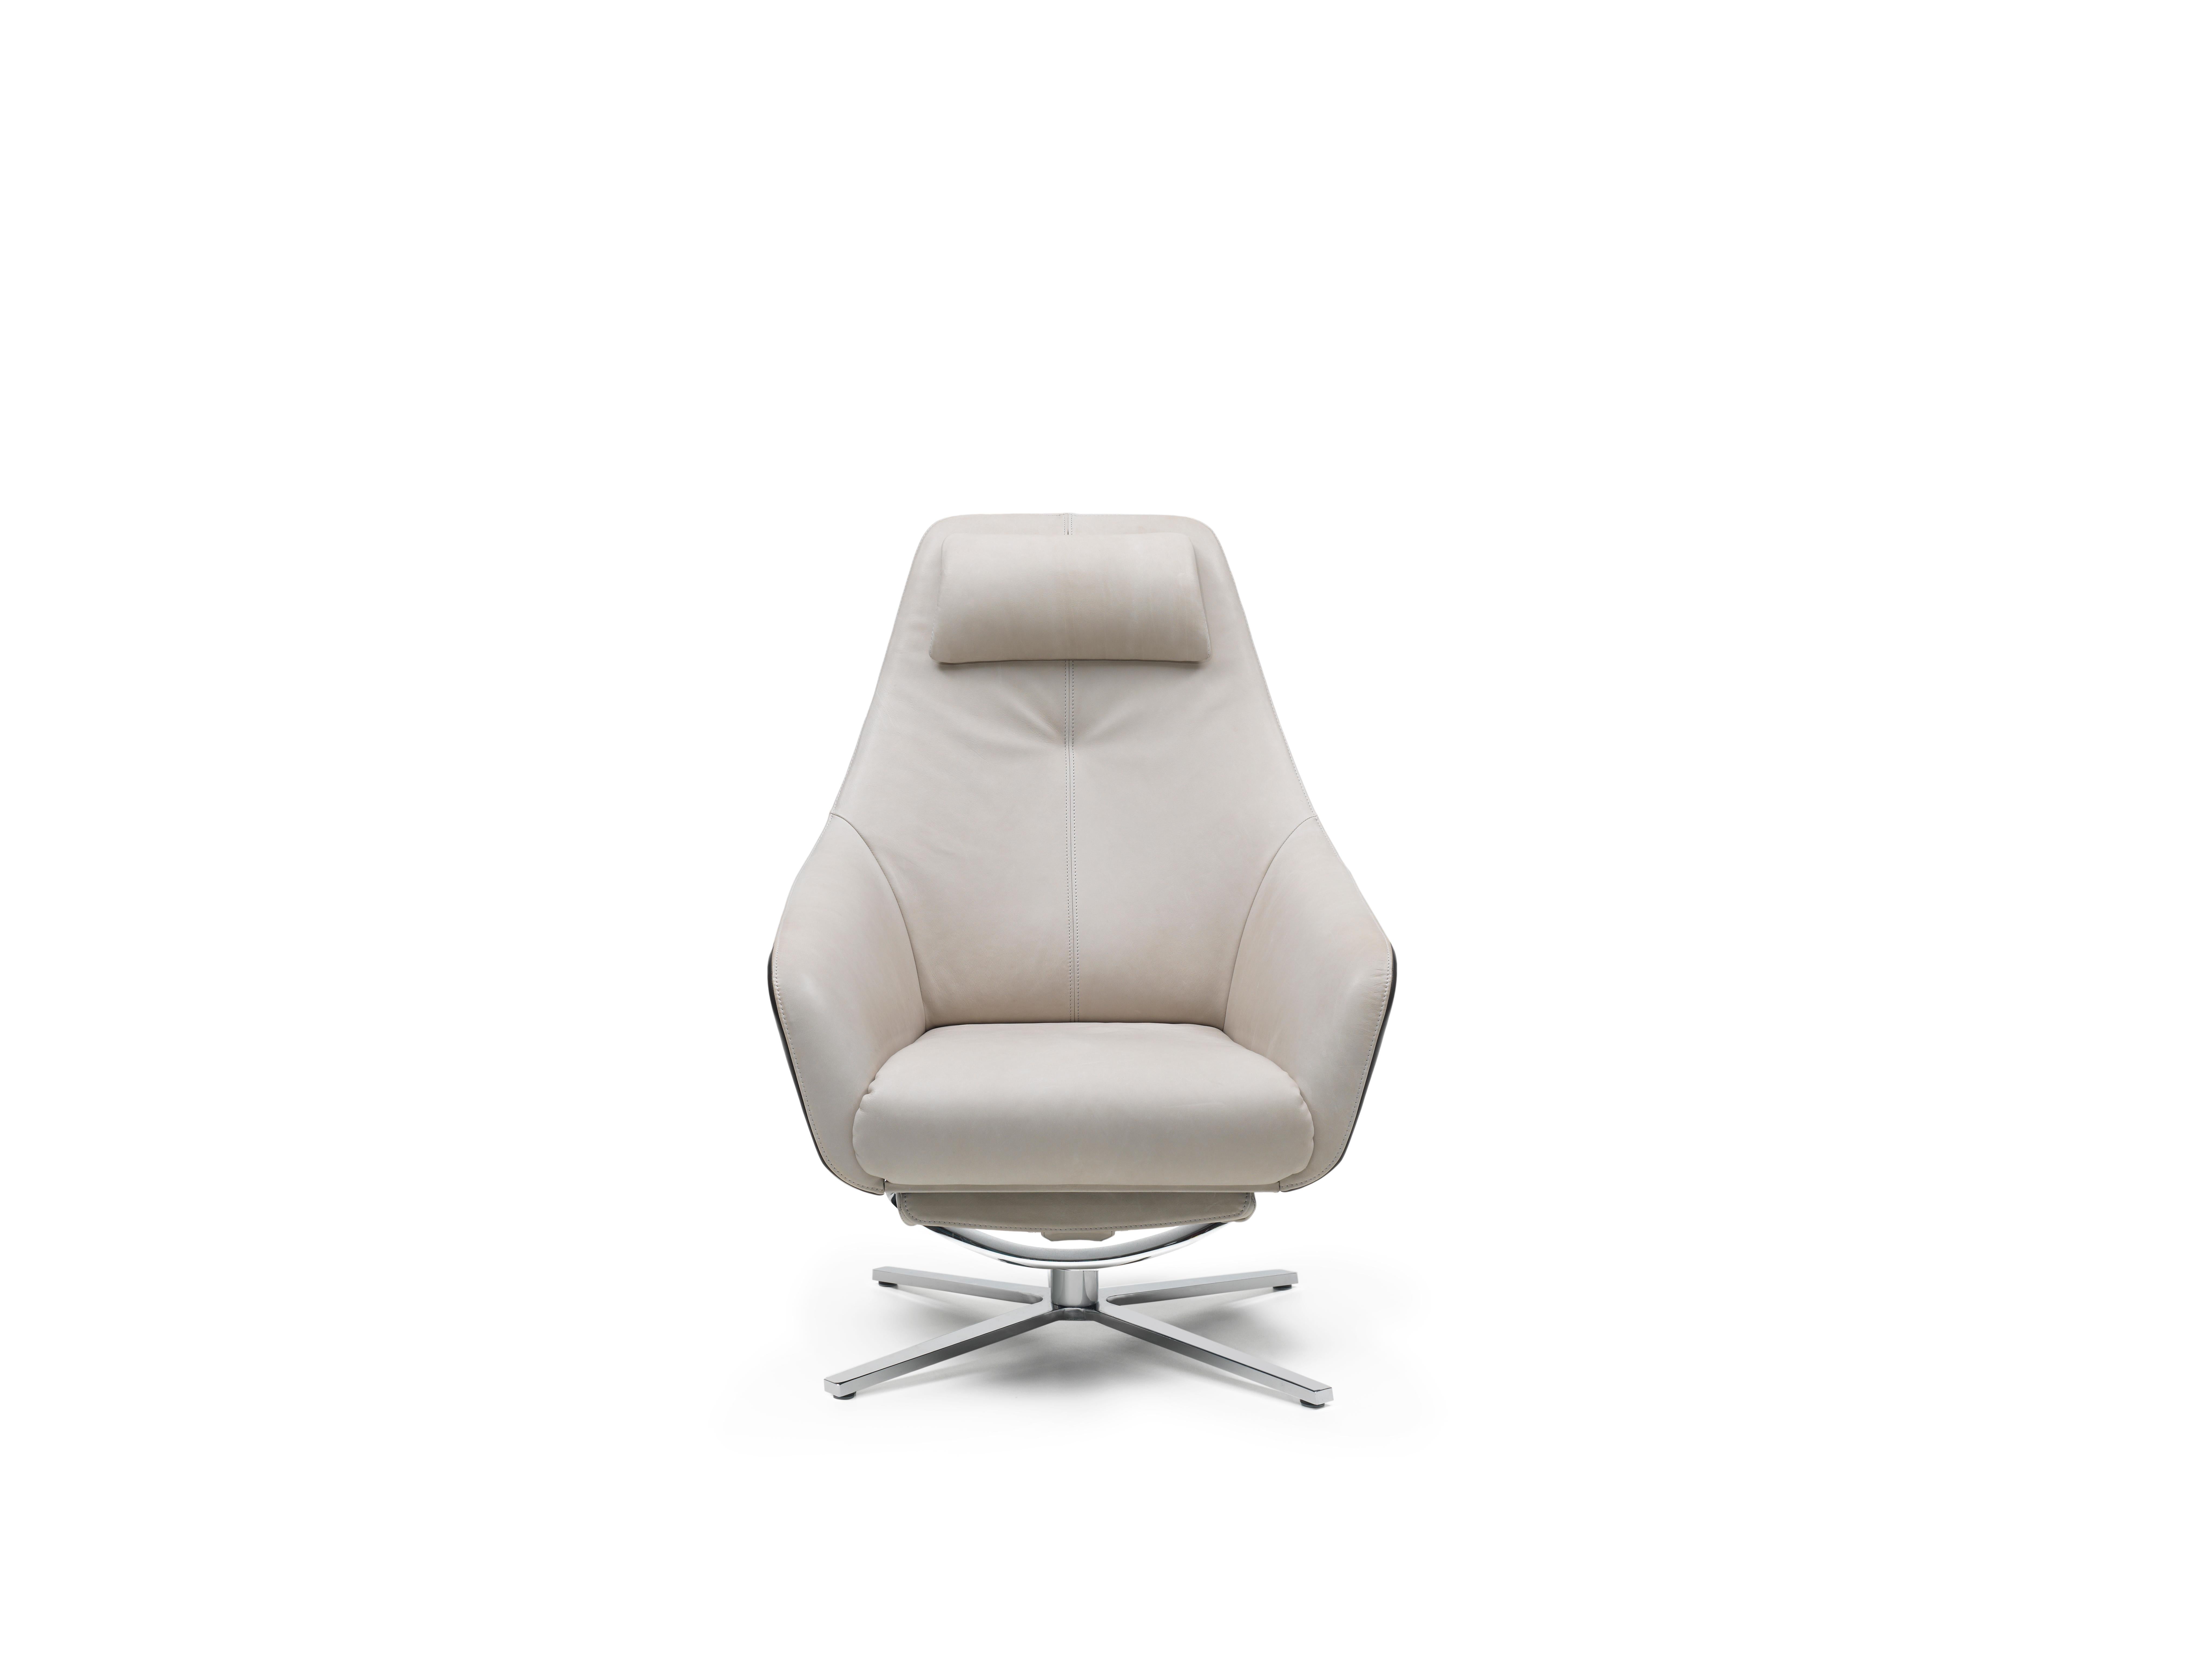 DS-277 armchair by De Sede
Dimensions: D 53 x W 44 x H 100 cm, with extension W 153
Materials: steel, leather

Prices may change according to the chosen materials and size. 

Maximum relax comfort

DS-277 is impressive for its formally